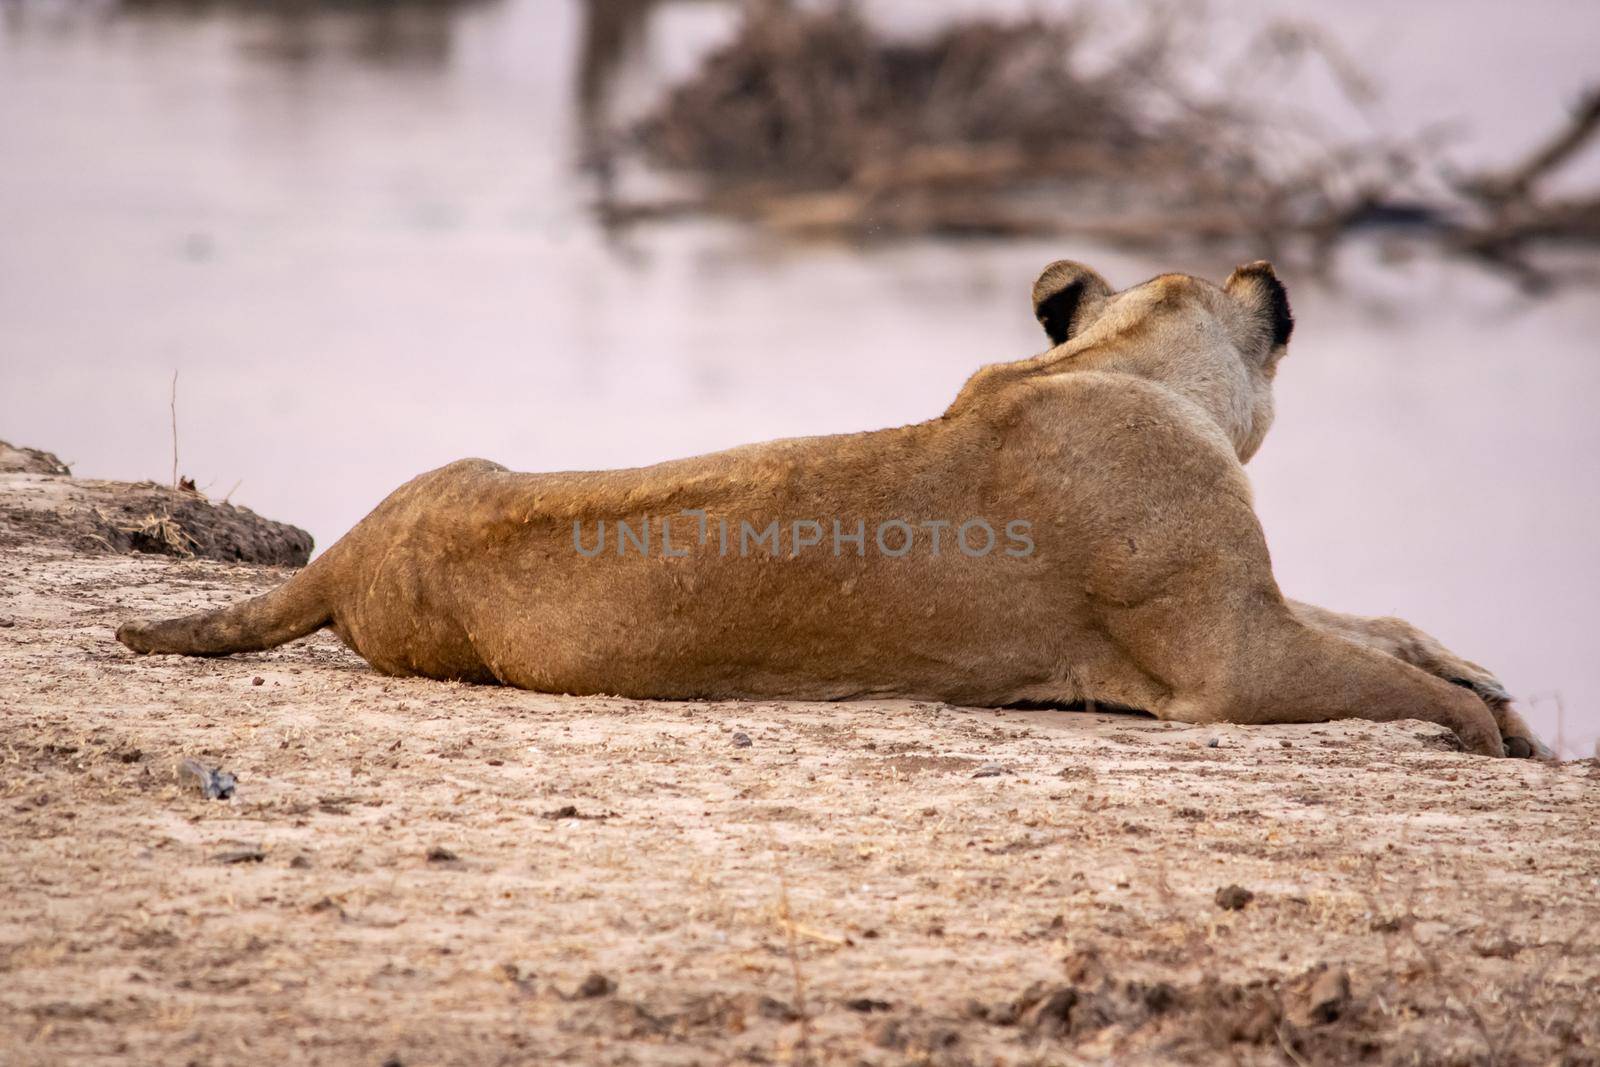 A close-up of a beautiful lioness resting after hunting